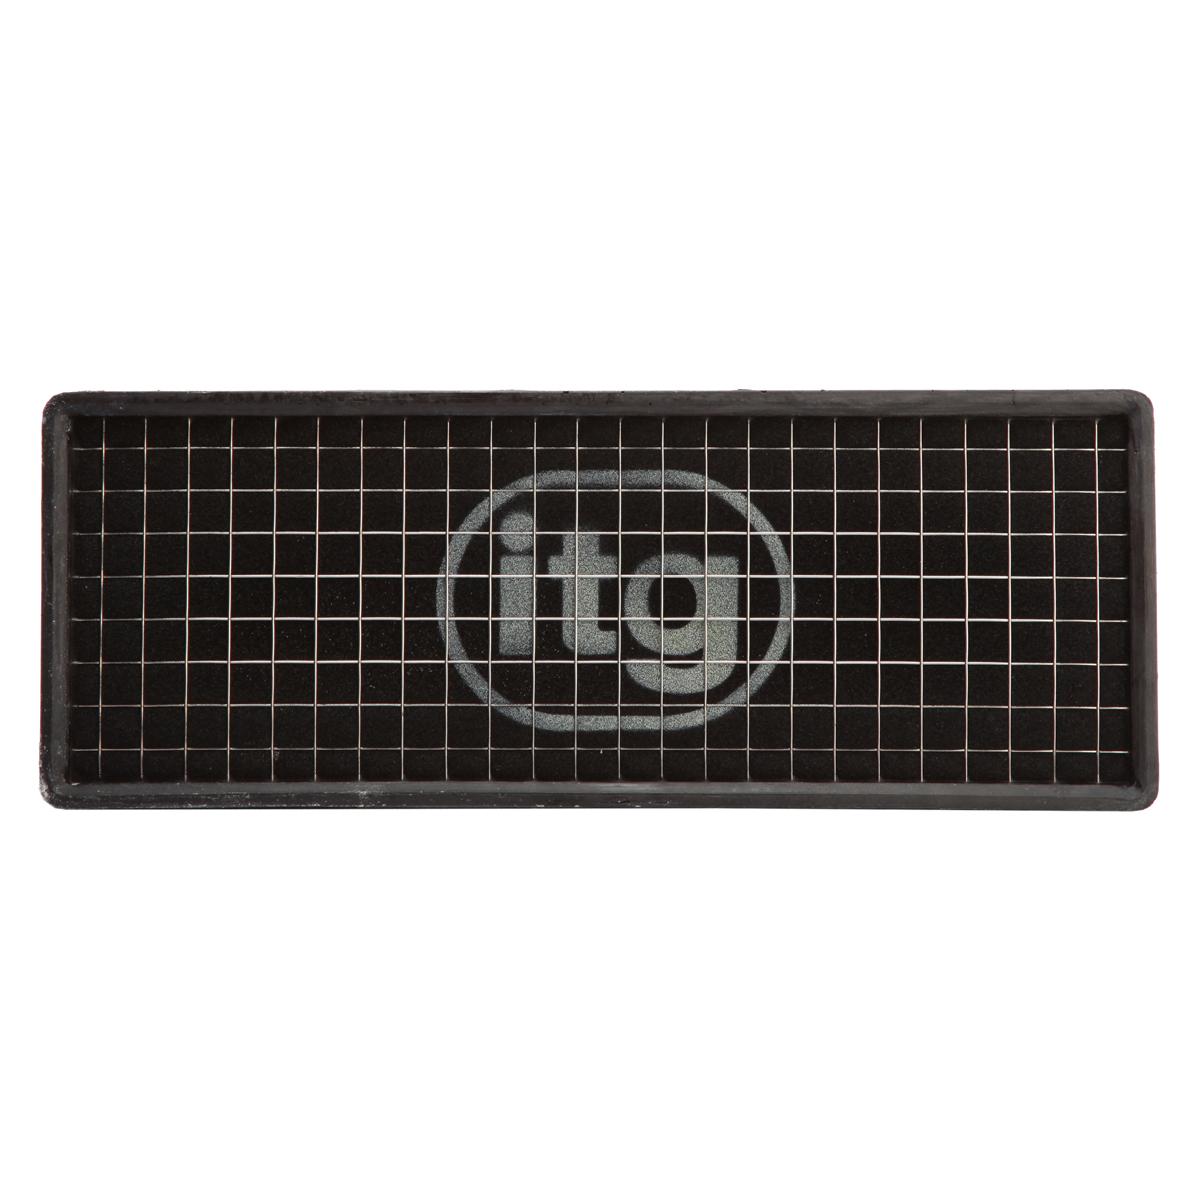 ITG Air Filter For Mercedes G55 Amg, Sl55 Amg, E55 Amg (05-08), Cls55 Amg (06-08) 2 Filters